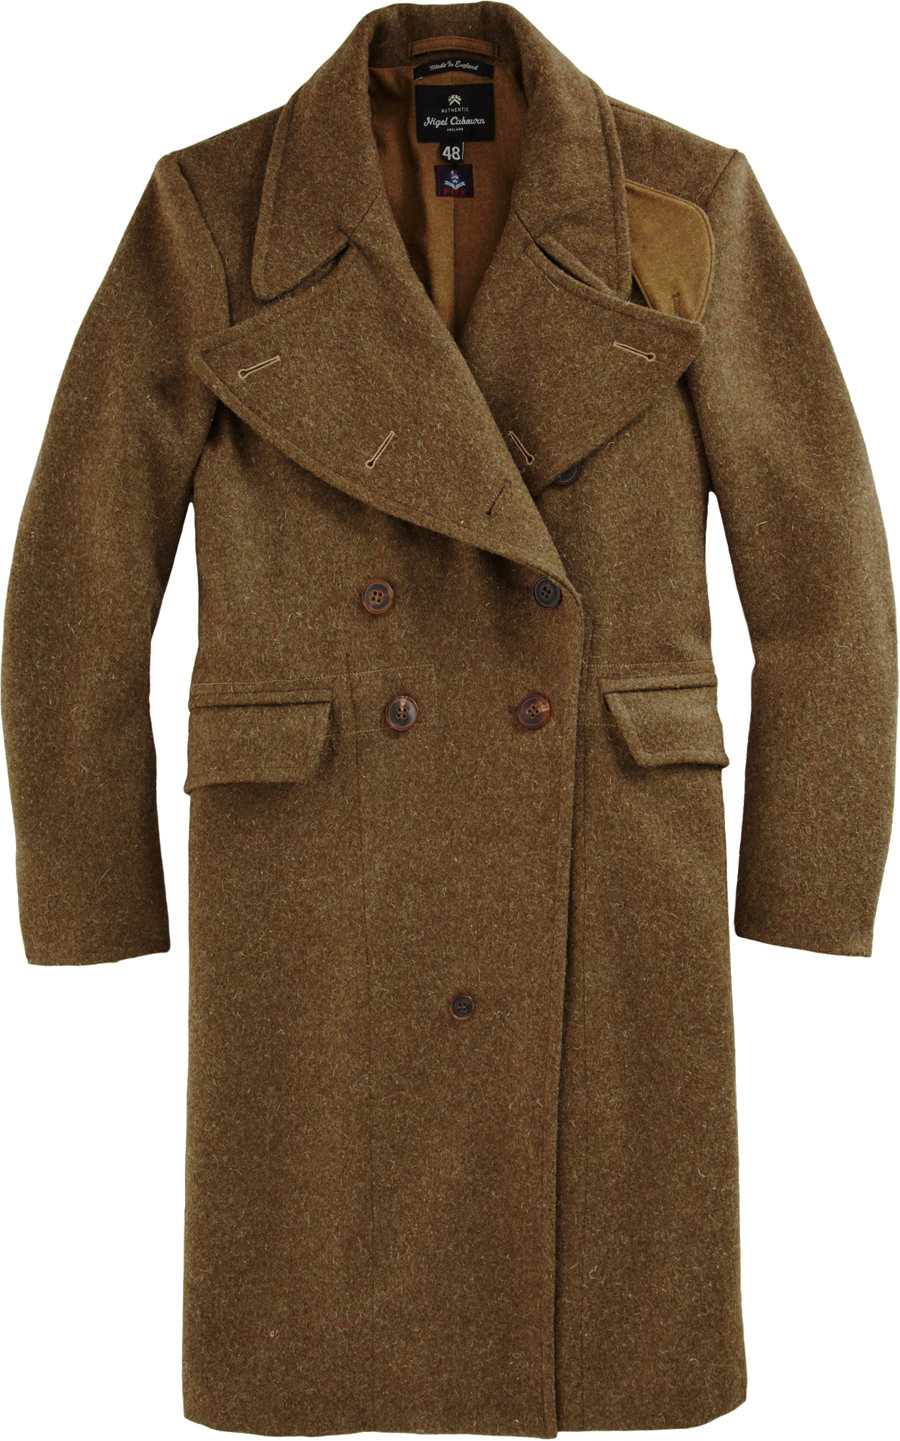 Lyst - Nigel cabourn Military Coat in Brown for Men